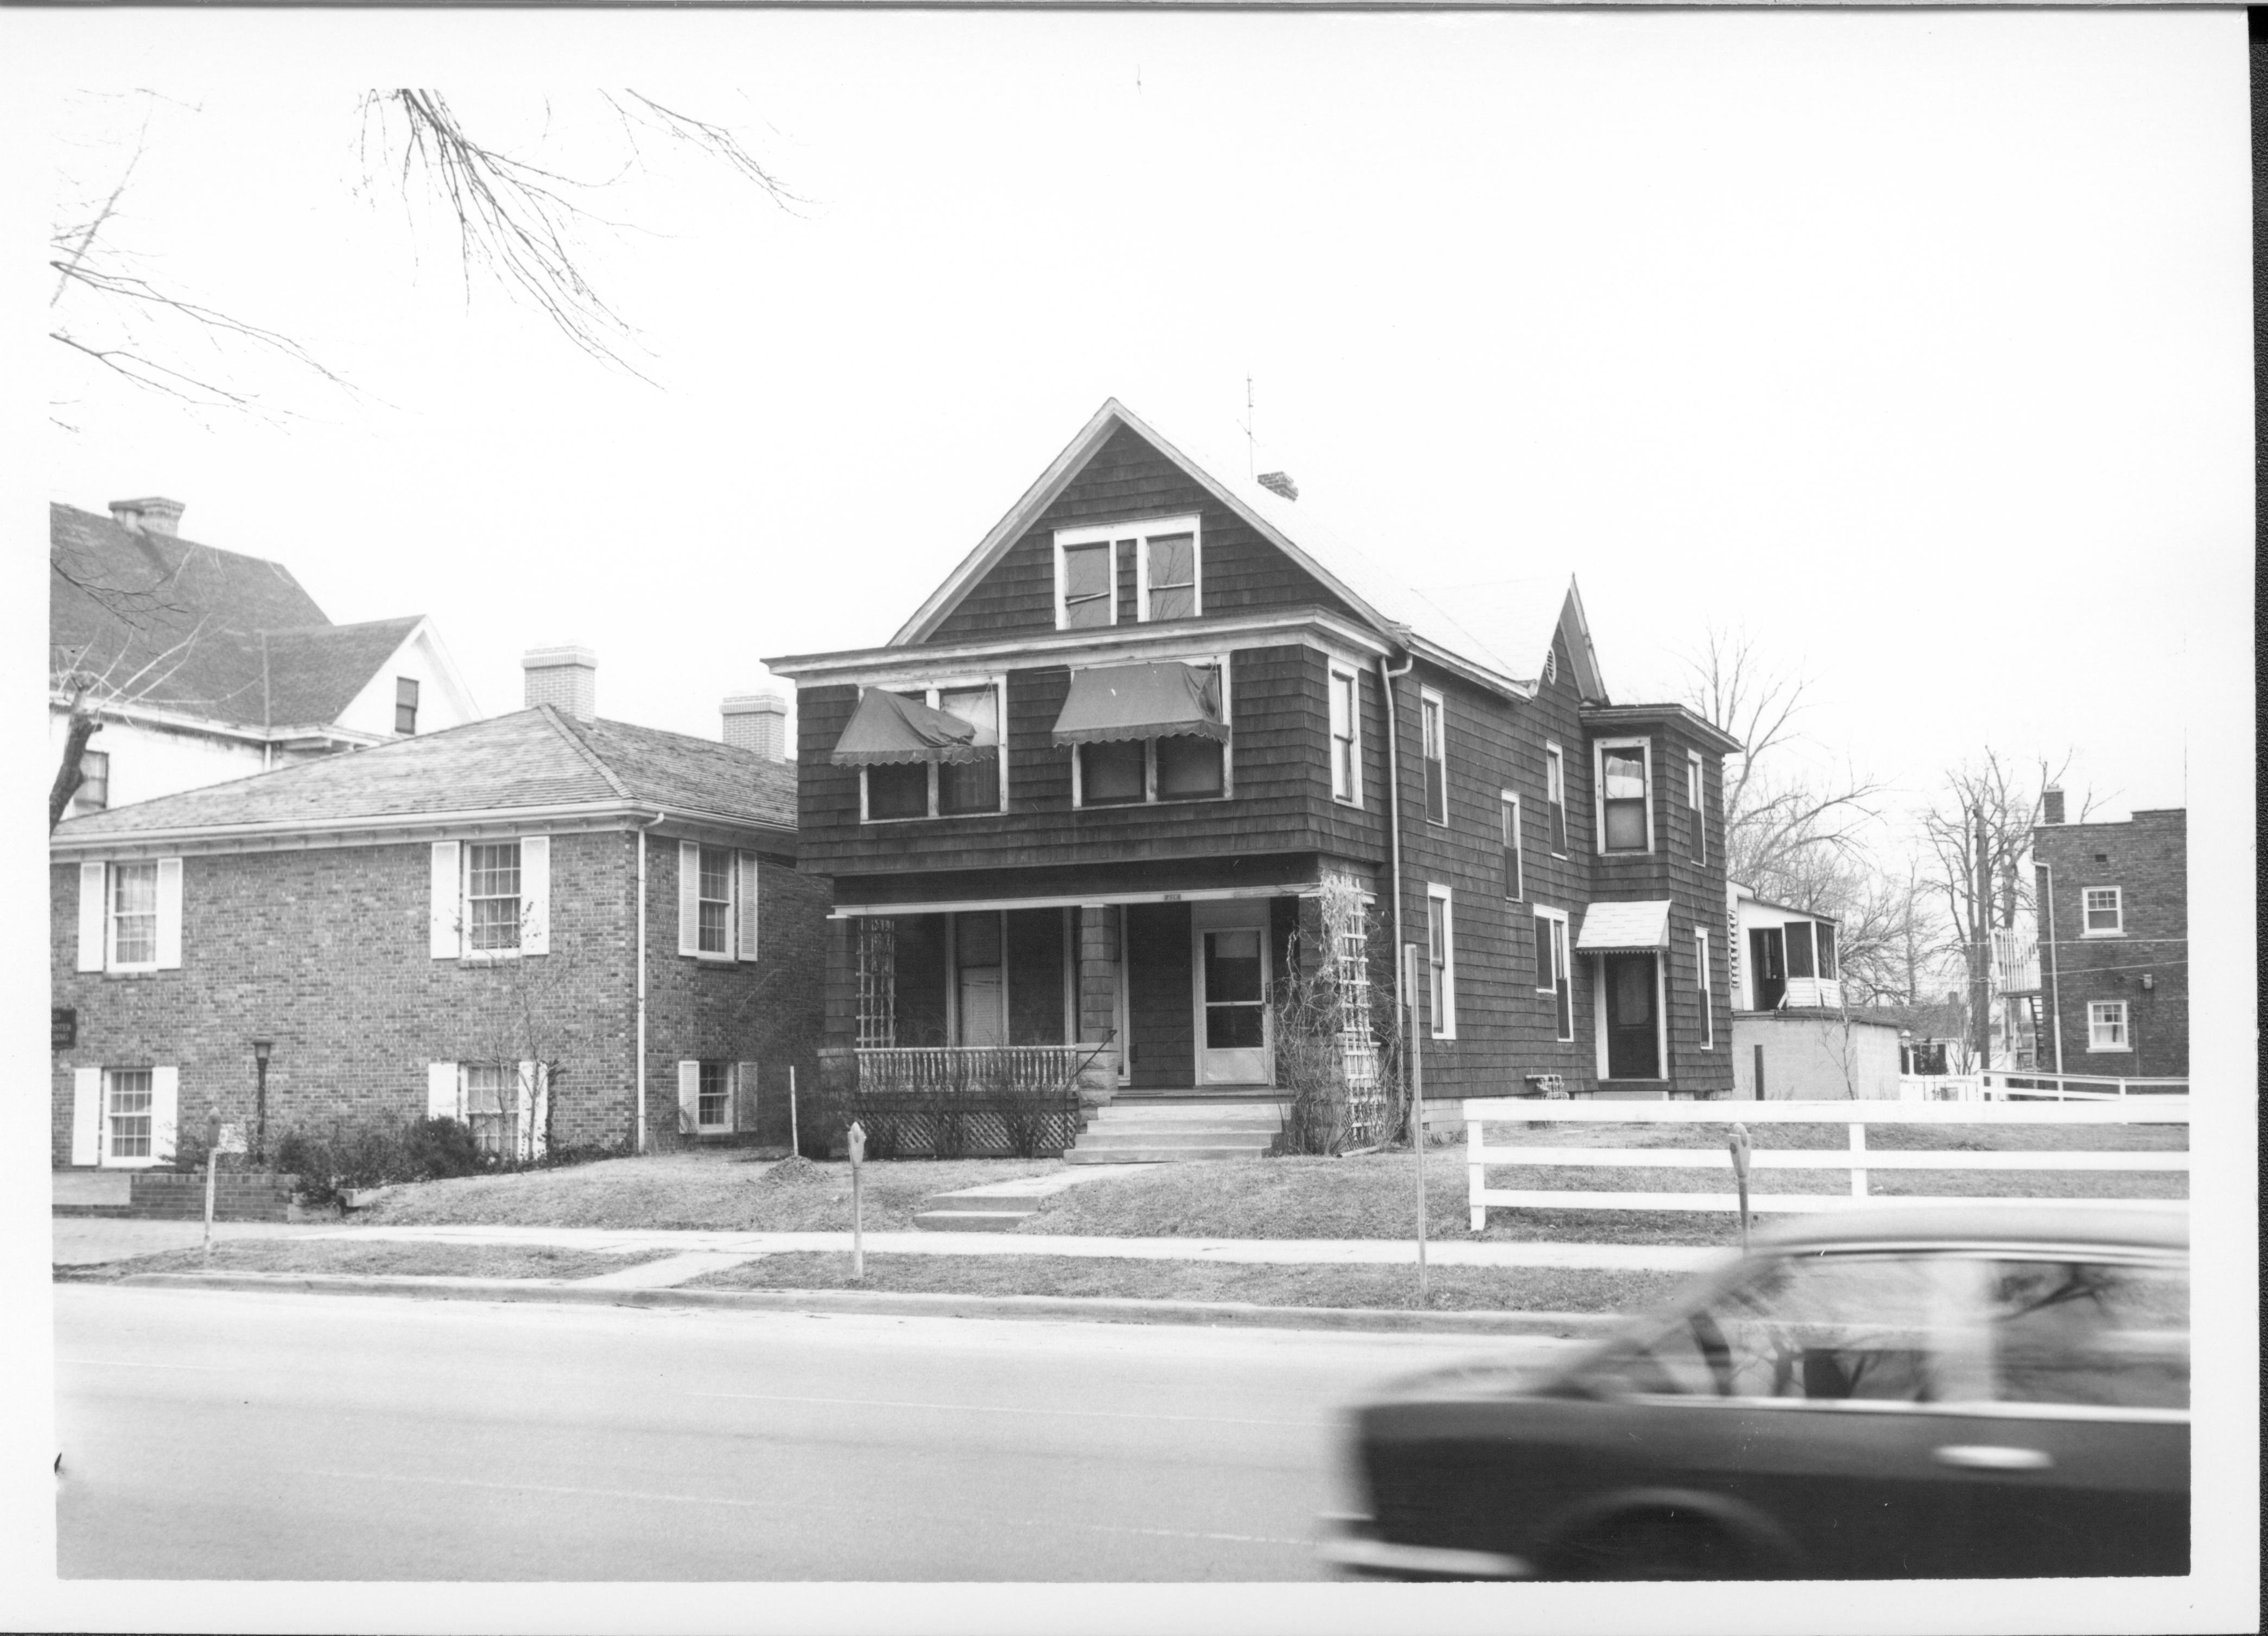 House belonging to Eleanor J. Pruett, Block 7, Lot 7 along 7th Street where Visitor Center now stands.  Building on left belonged to Evelyn Grummon used by Springfield Marine Bank and labeled as the Barrister Building.  Apartment building on Burch lot seen on far right Looking East along 7th Street Pruett, Grummon, Visitor Center, 7th Street, Burch, apartment